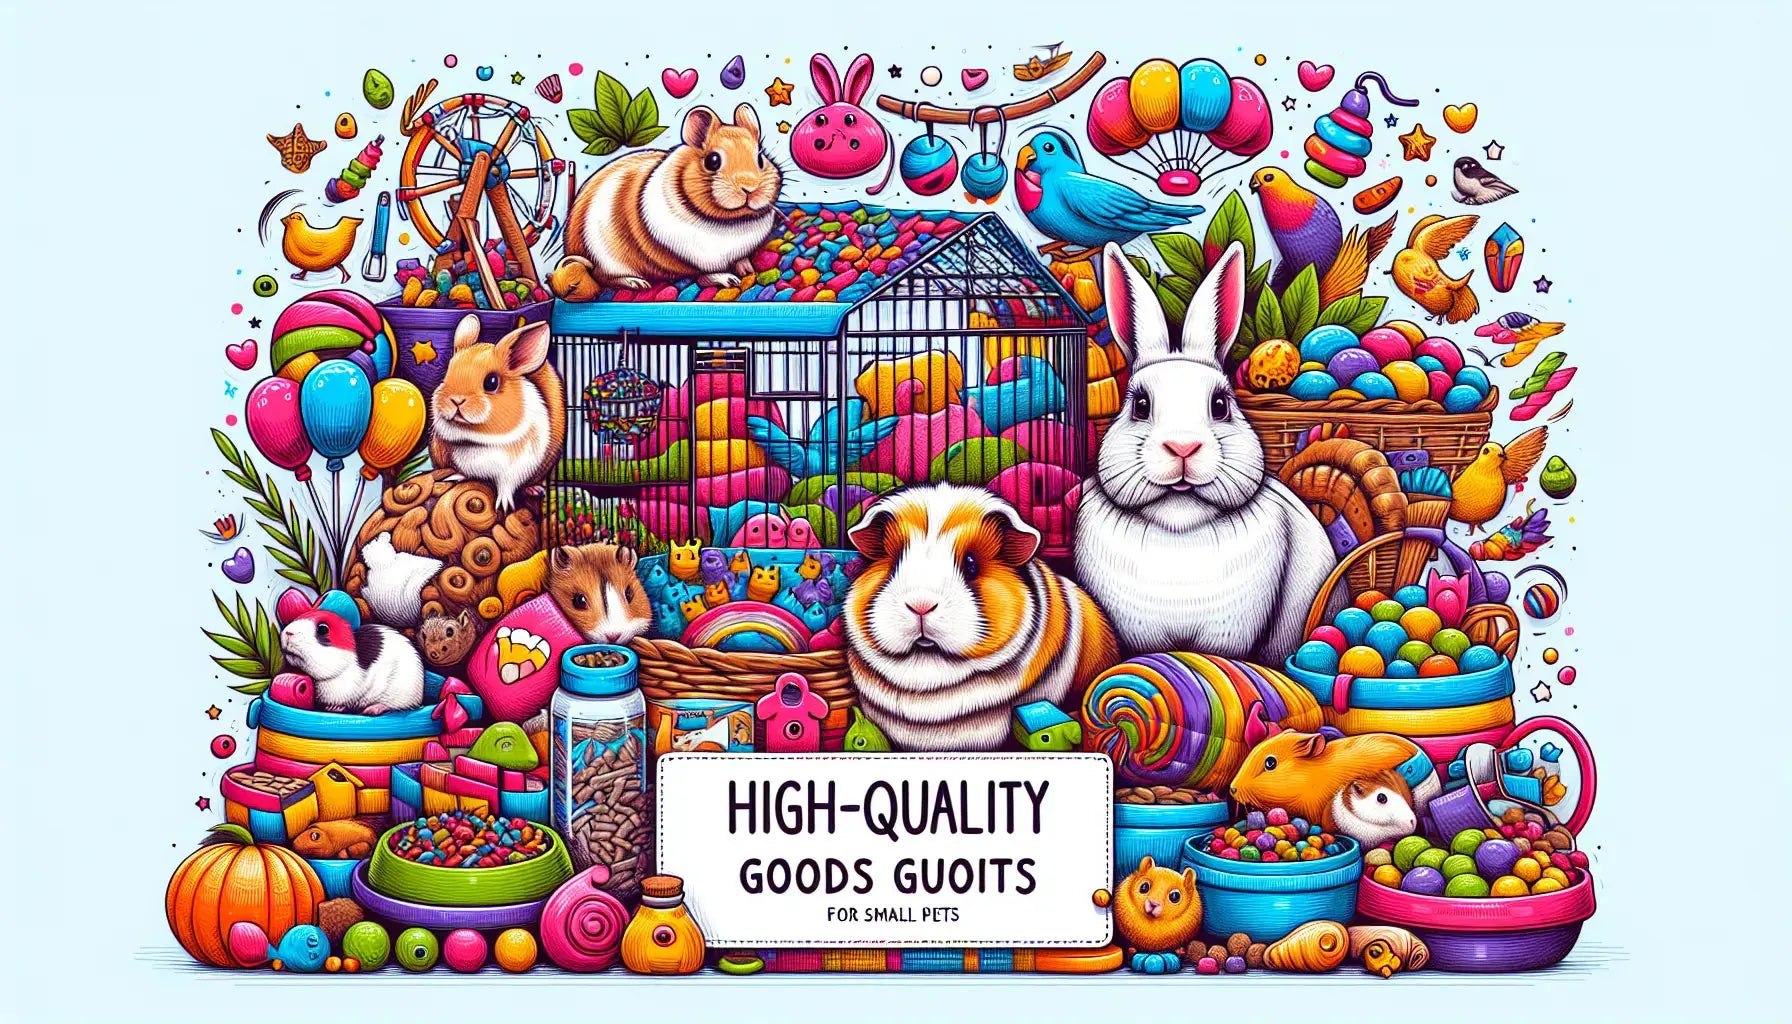 Discover a Variety of High-Quality Products for Small Animals